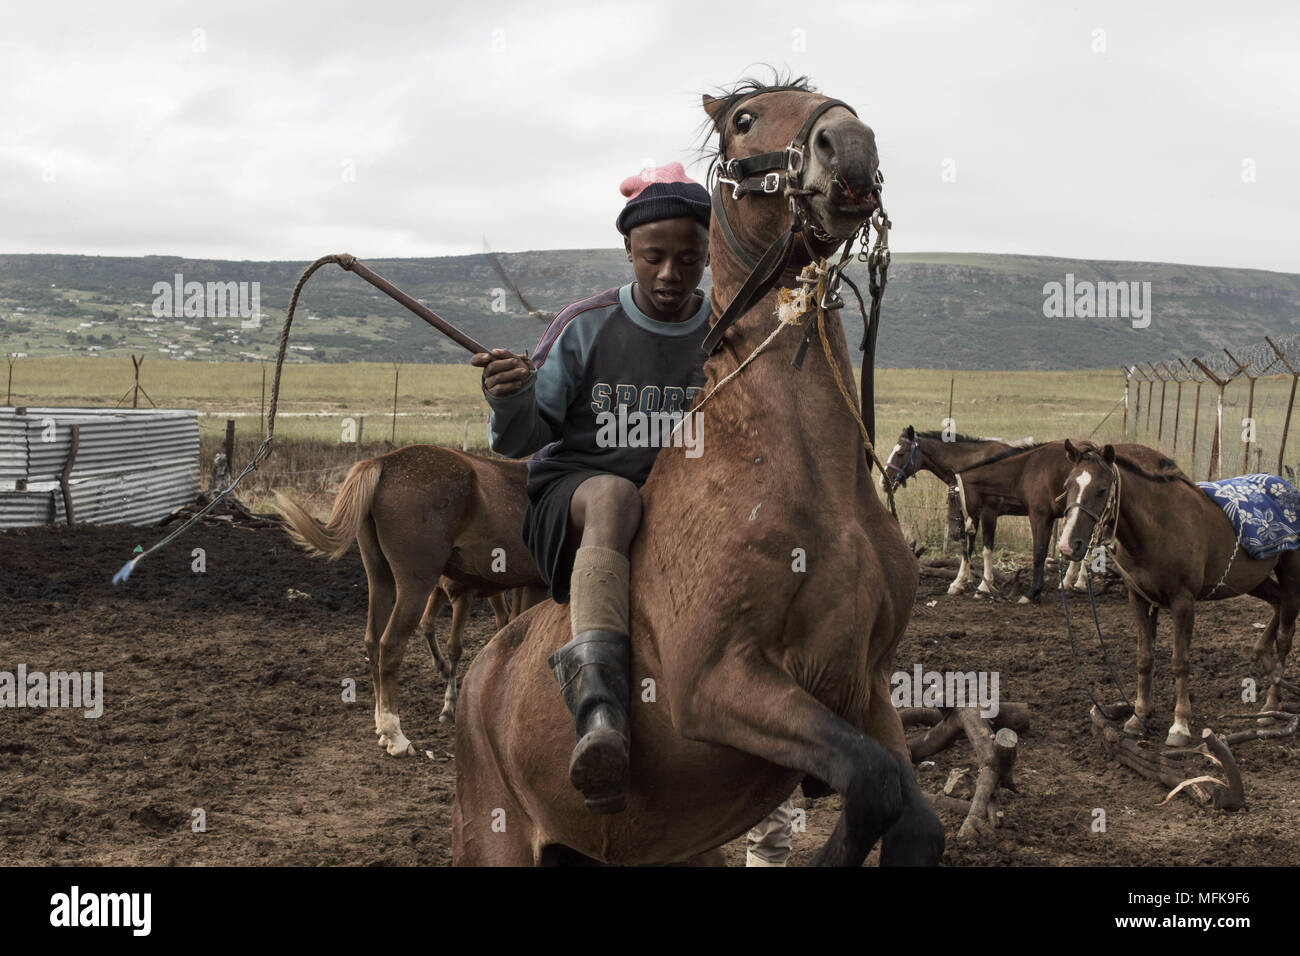 African Cowboys 35 Jpg High Resolution Stock Photography And Images Alamy